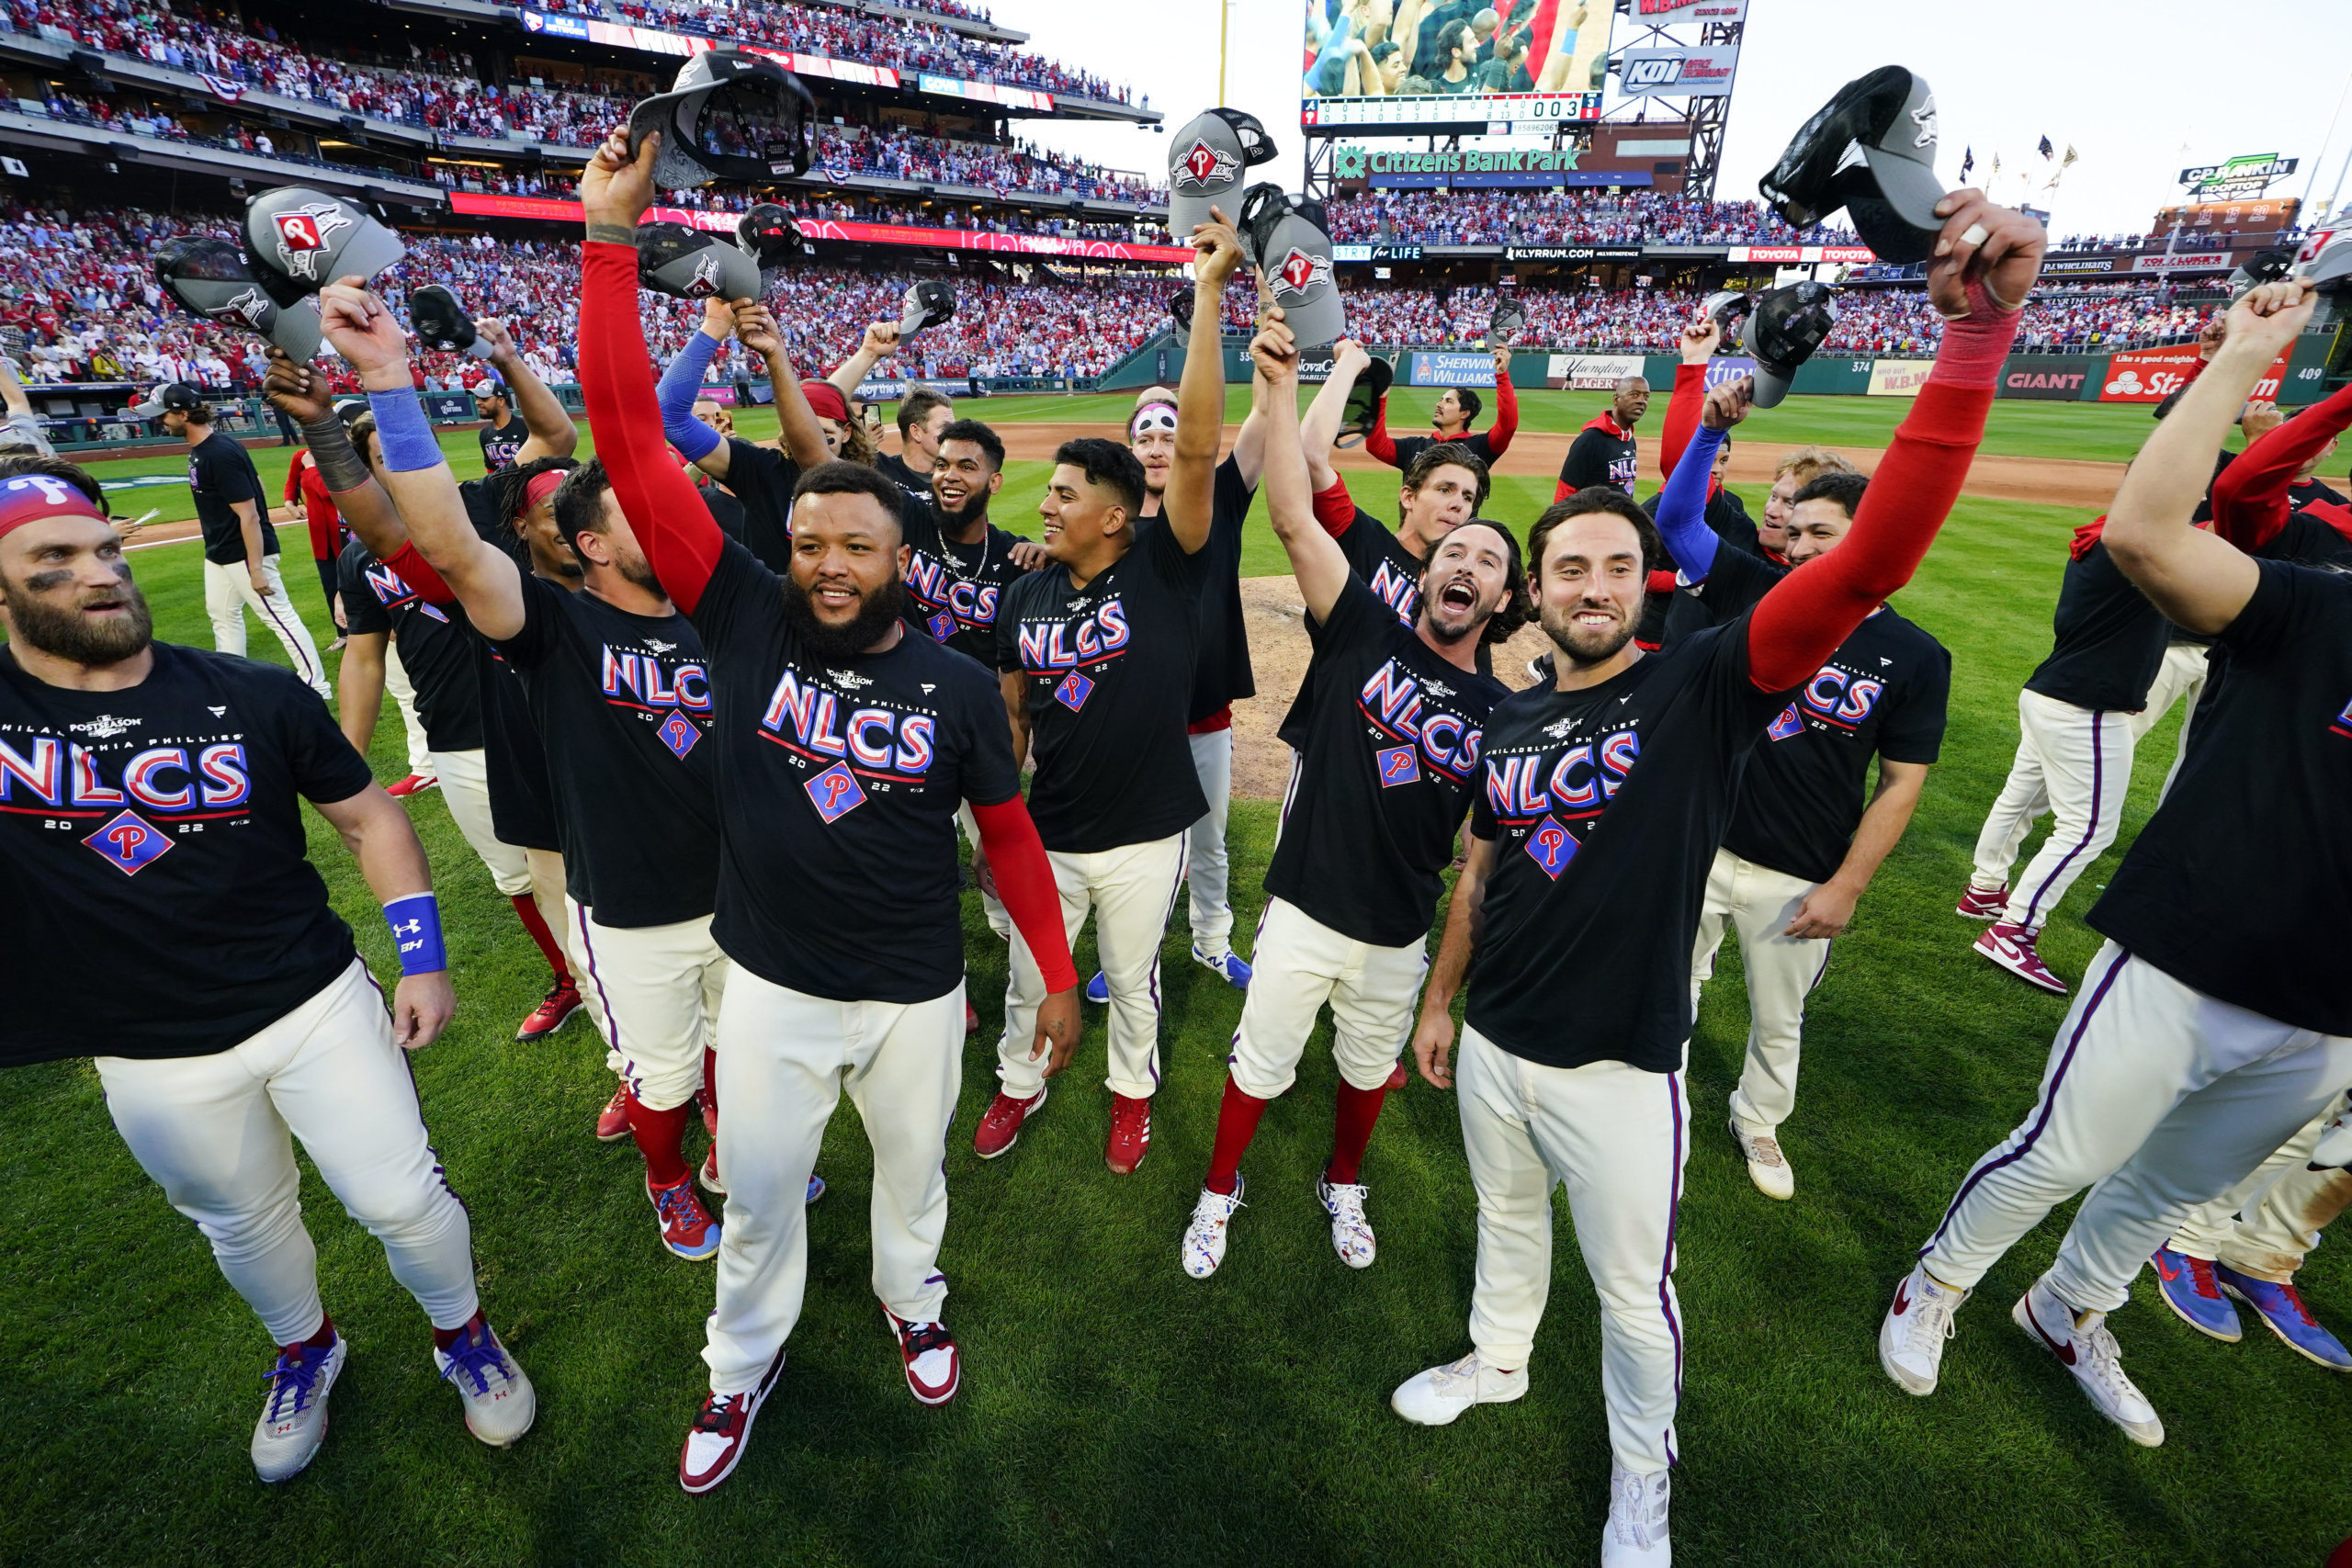 WATCH: Phillies celebrate first trip to World Series since 2009